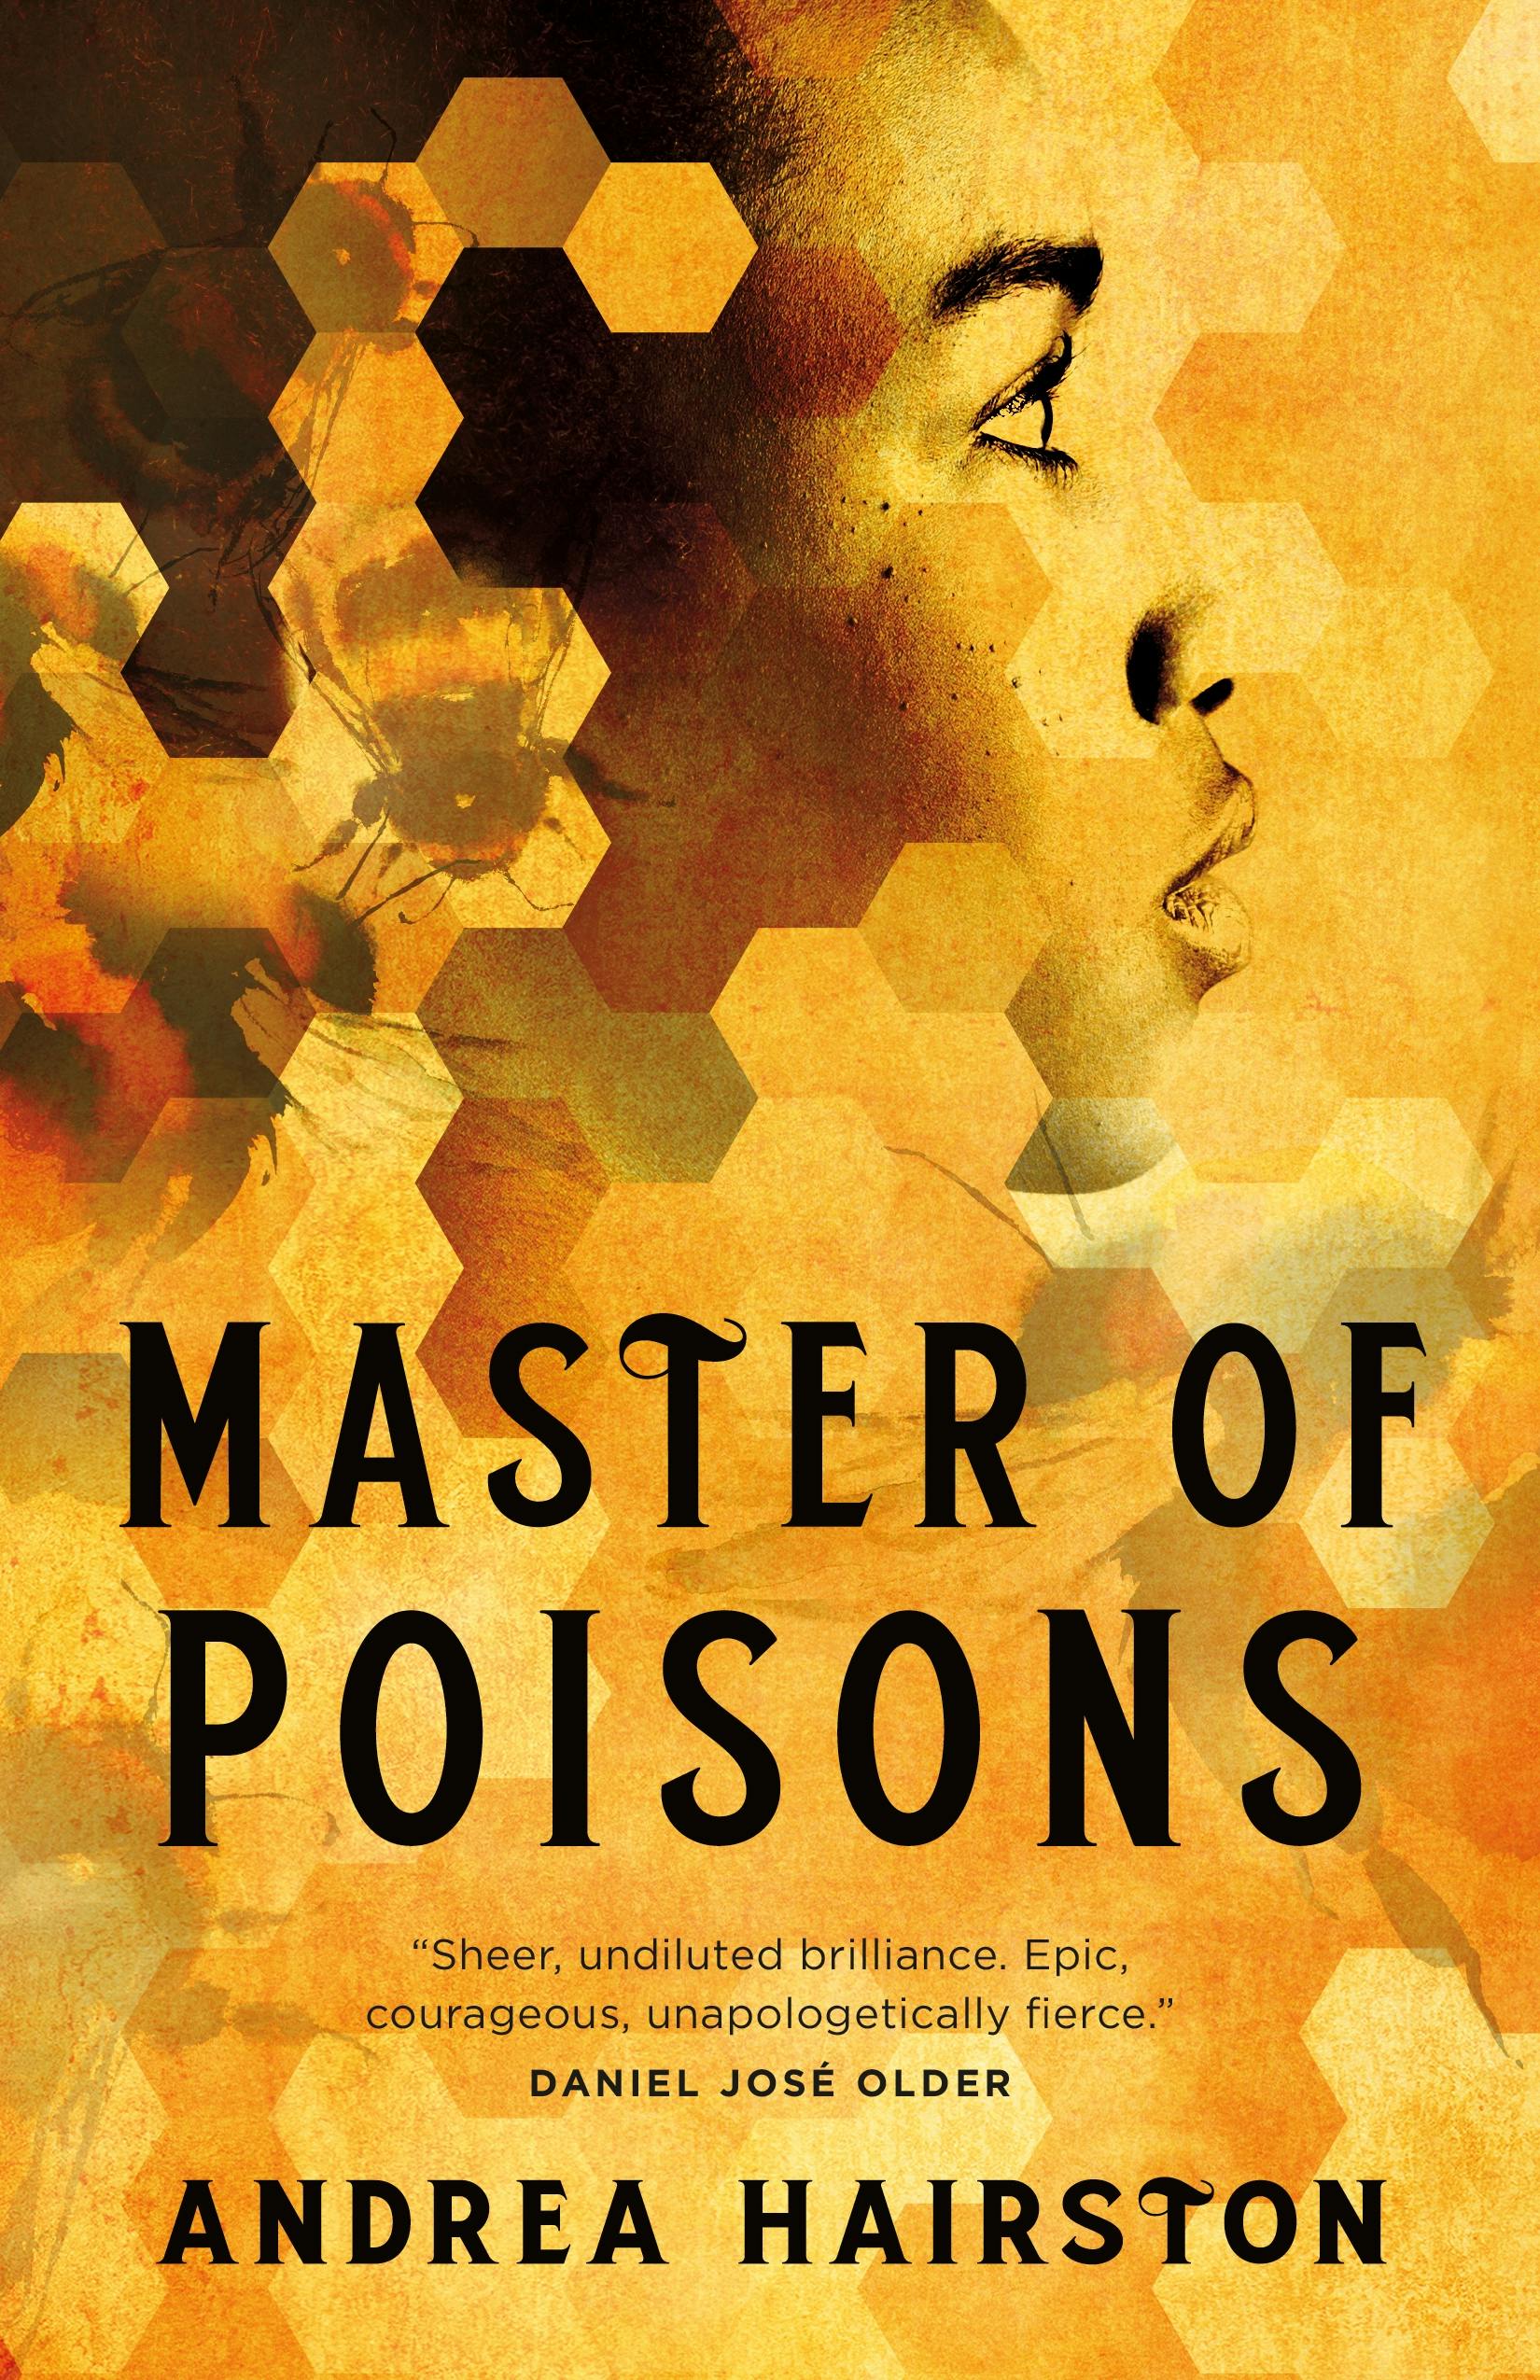 Cover for the book titled as: Master of Poisons